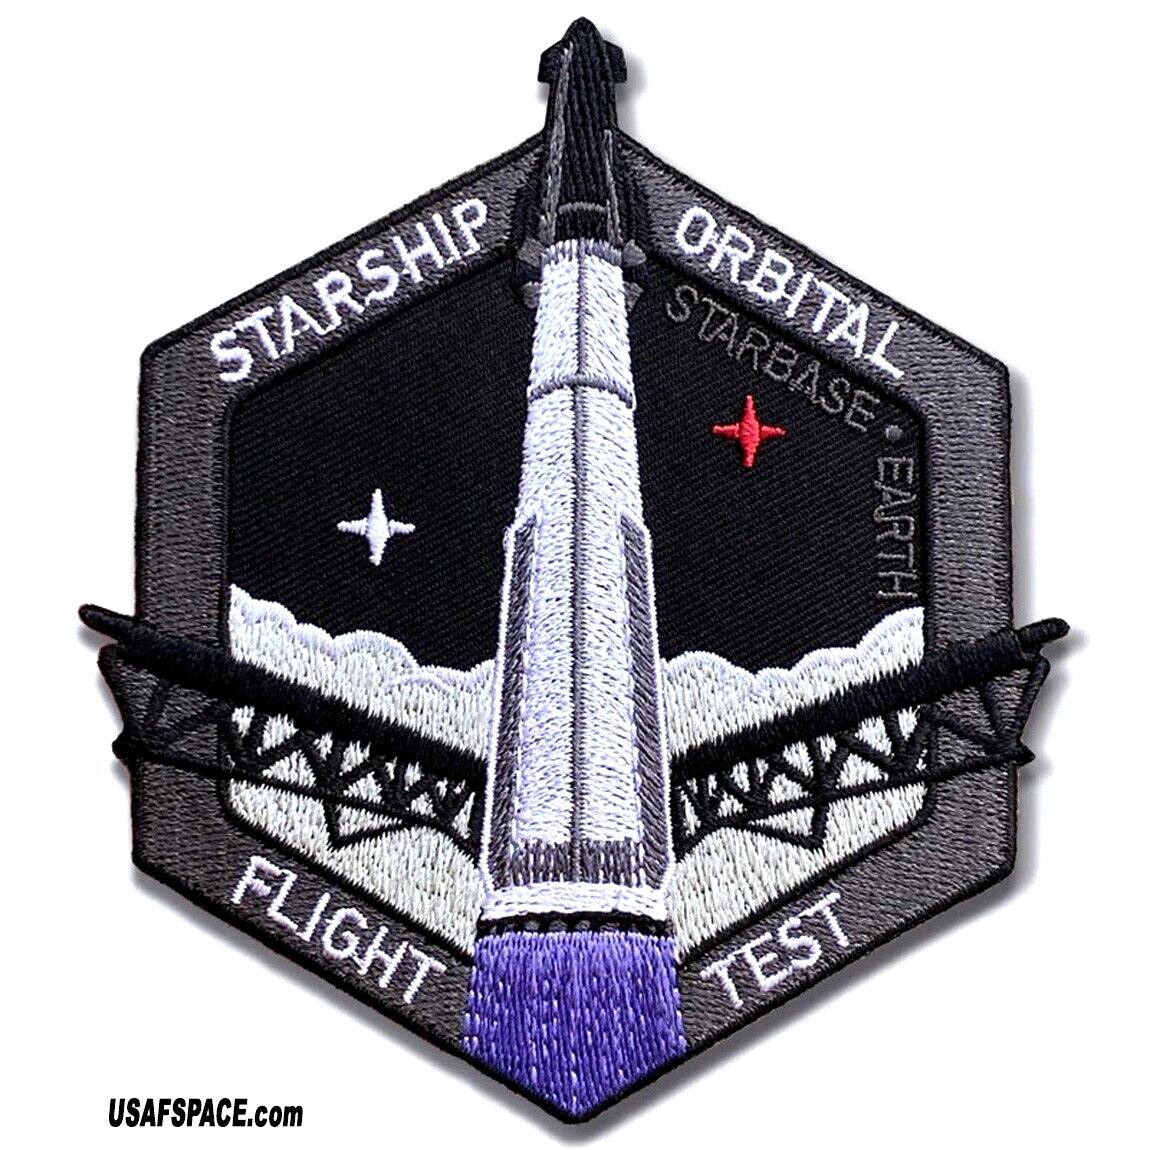 Authentic STARSHIP ORBITAL FLIGHT TEST SPACEX STARBASE-EARTH SPACE Launch PATCH